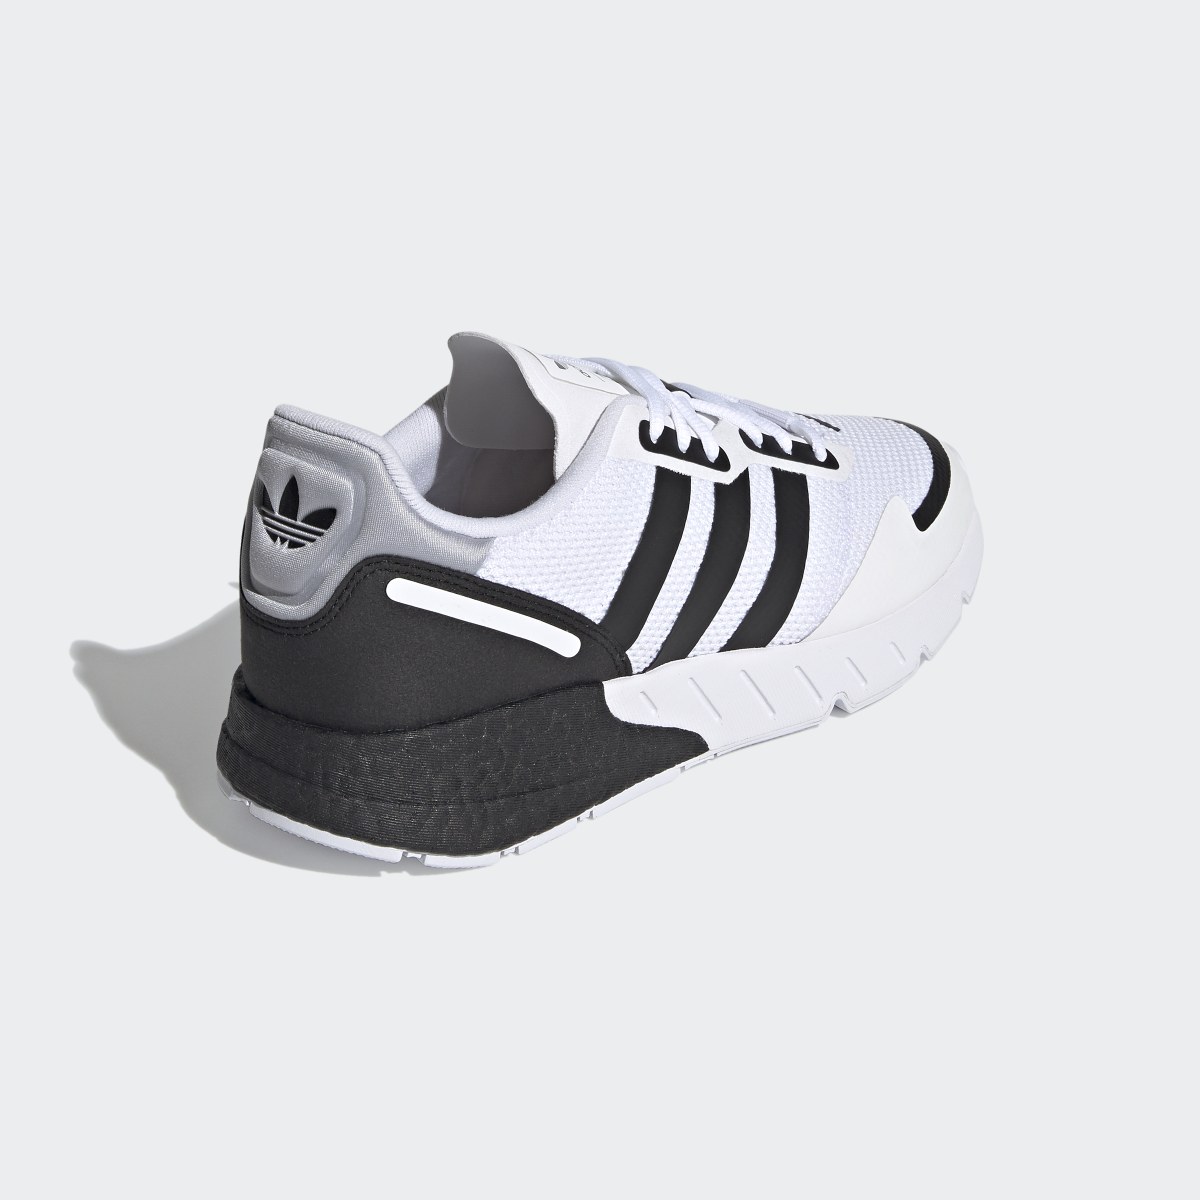 Adidas ZX 1K Boost Shoes. 6